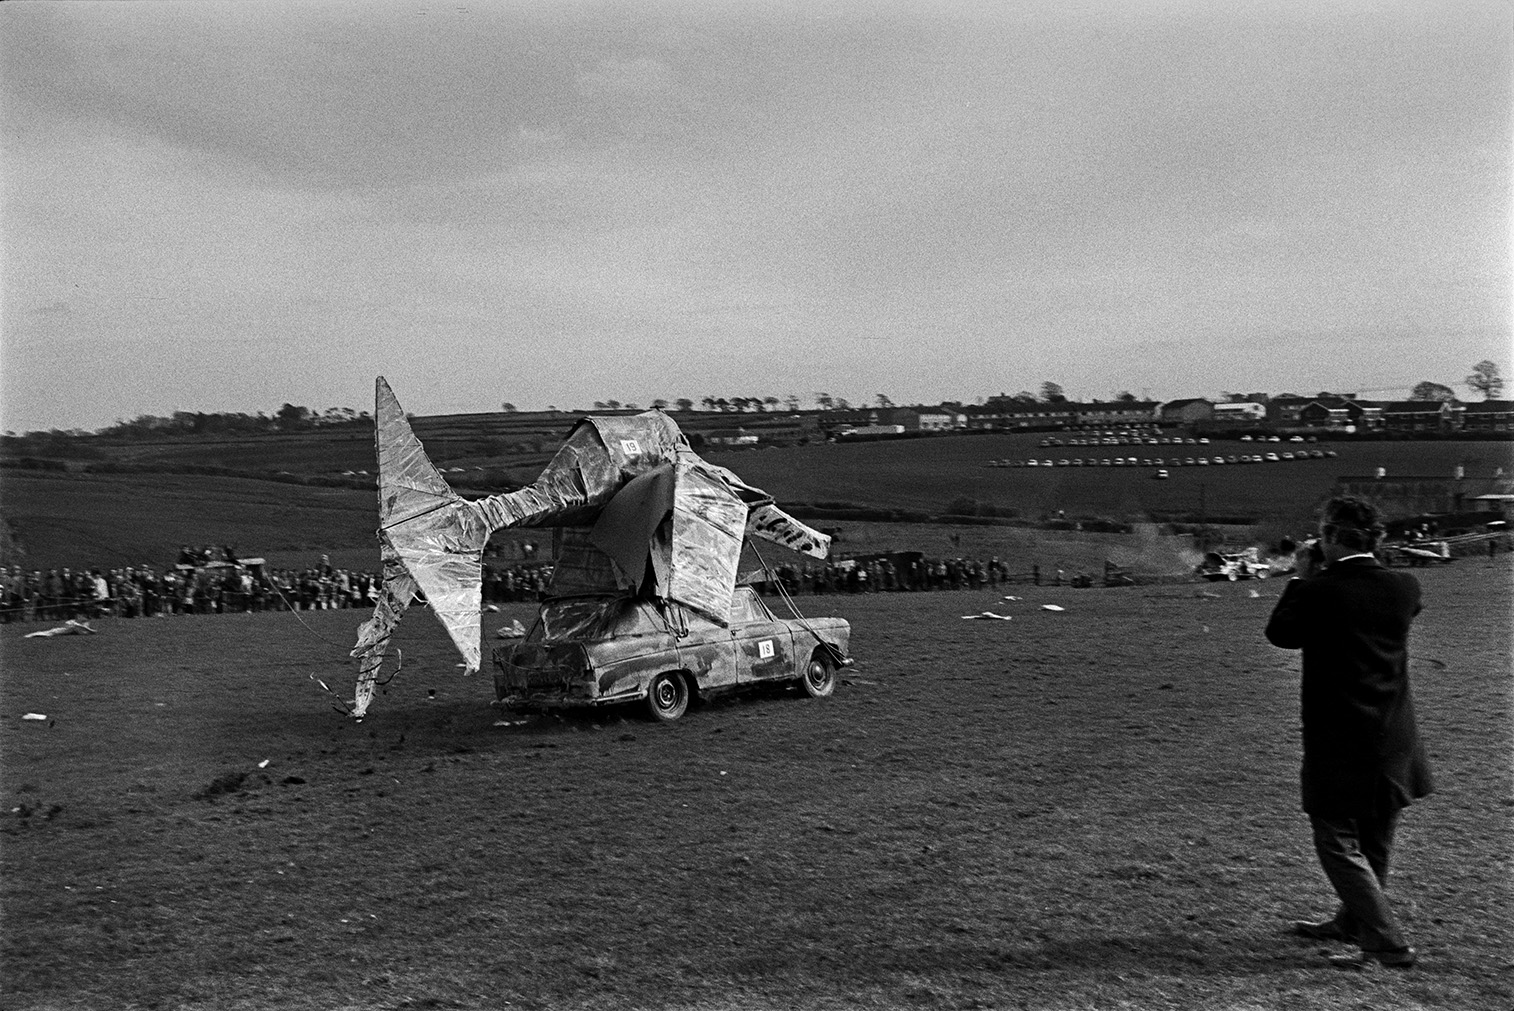 Spectators watching man made flying machines try to take off at a 'Man Powered Flight' competition in a field at Crowbeare. A man is either taking a photograph or filming a car with a fish model on top in the foreground.